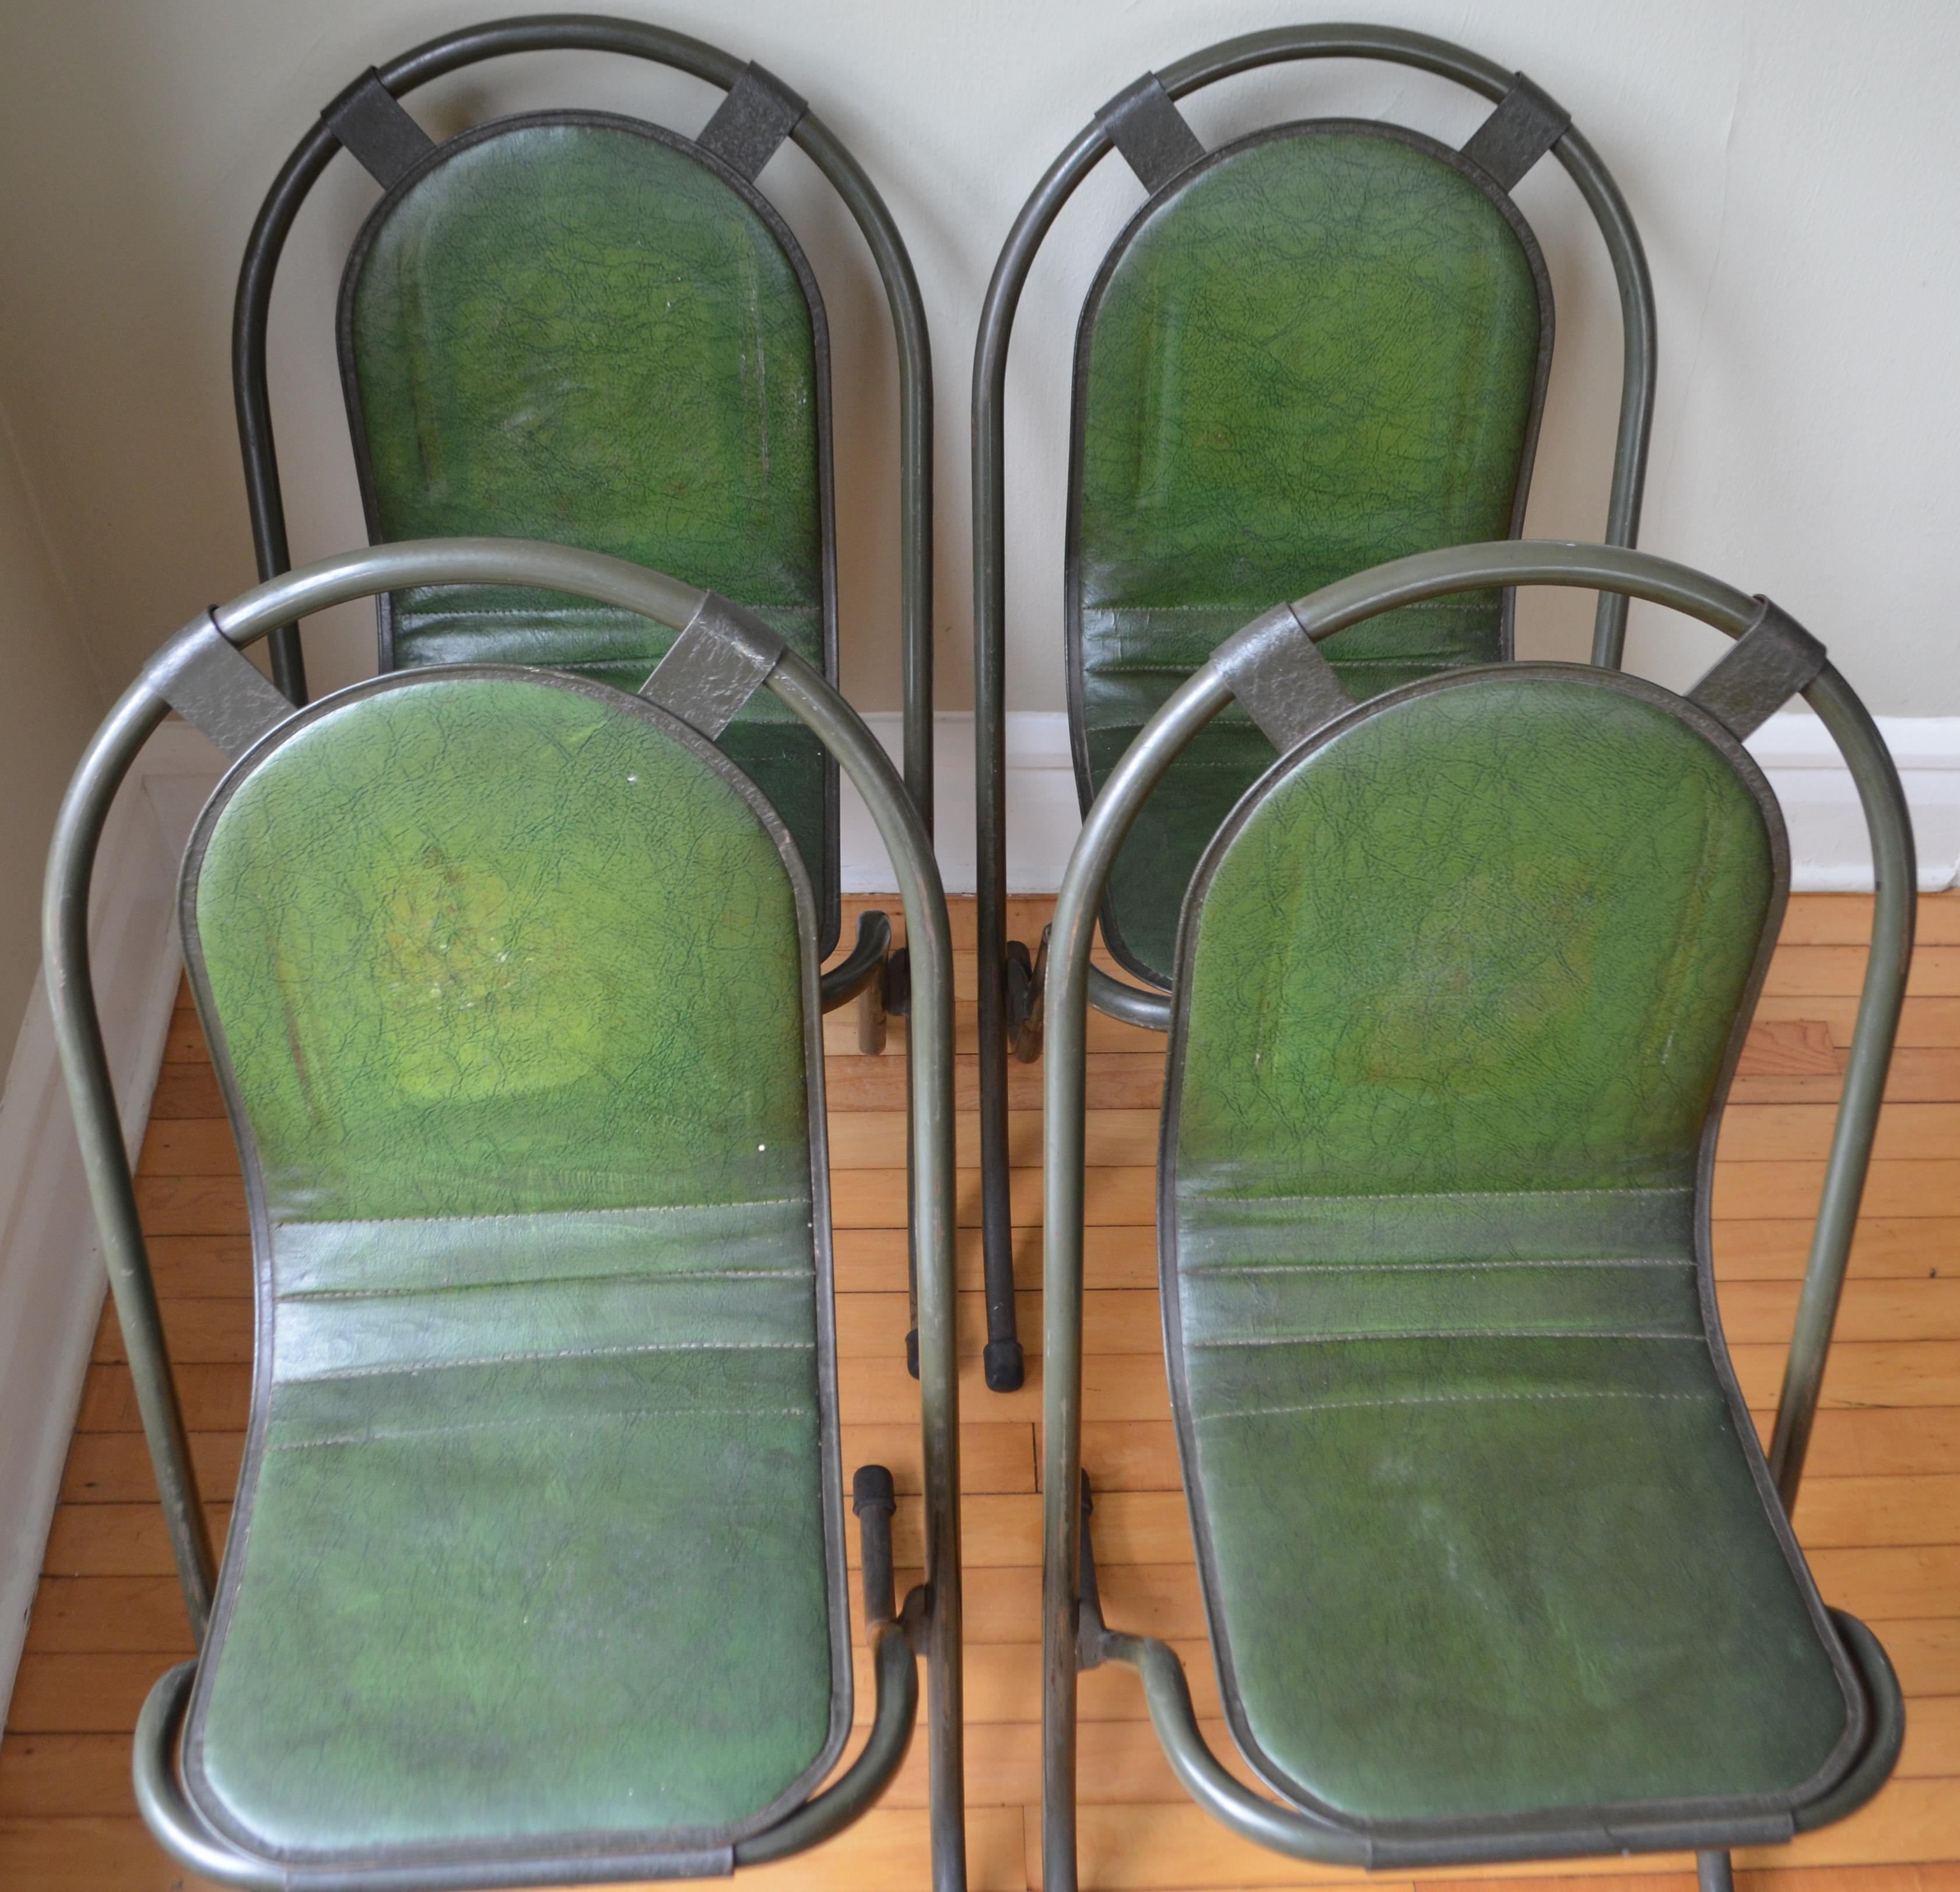 sebel chairs for sale